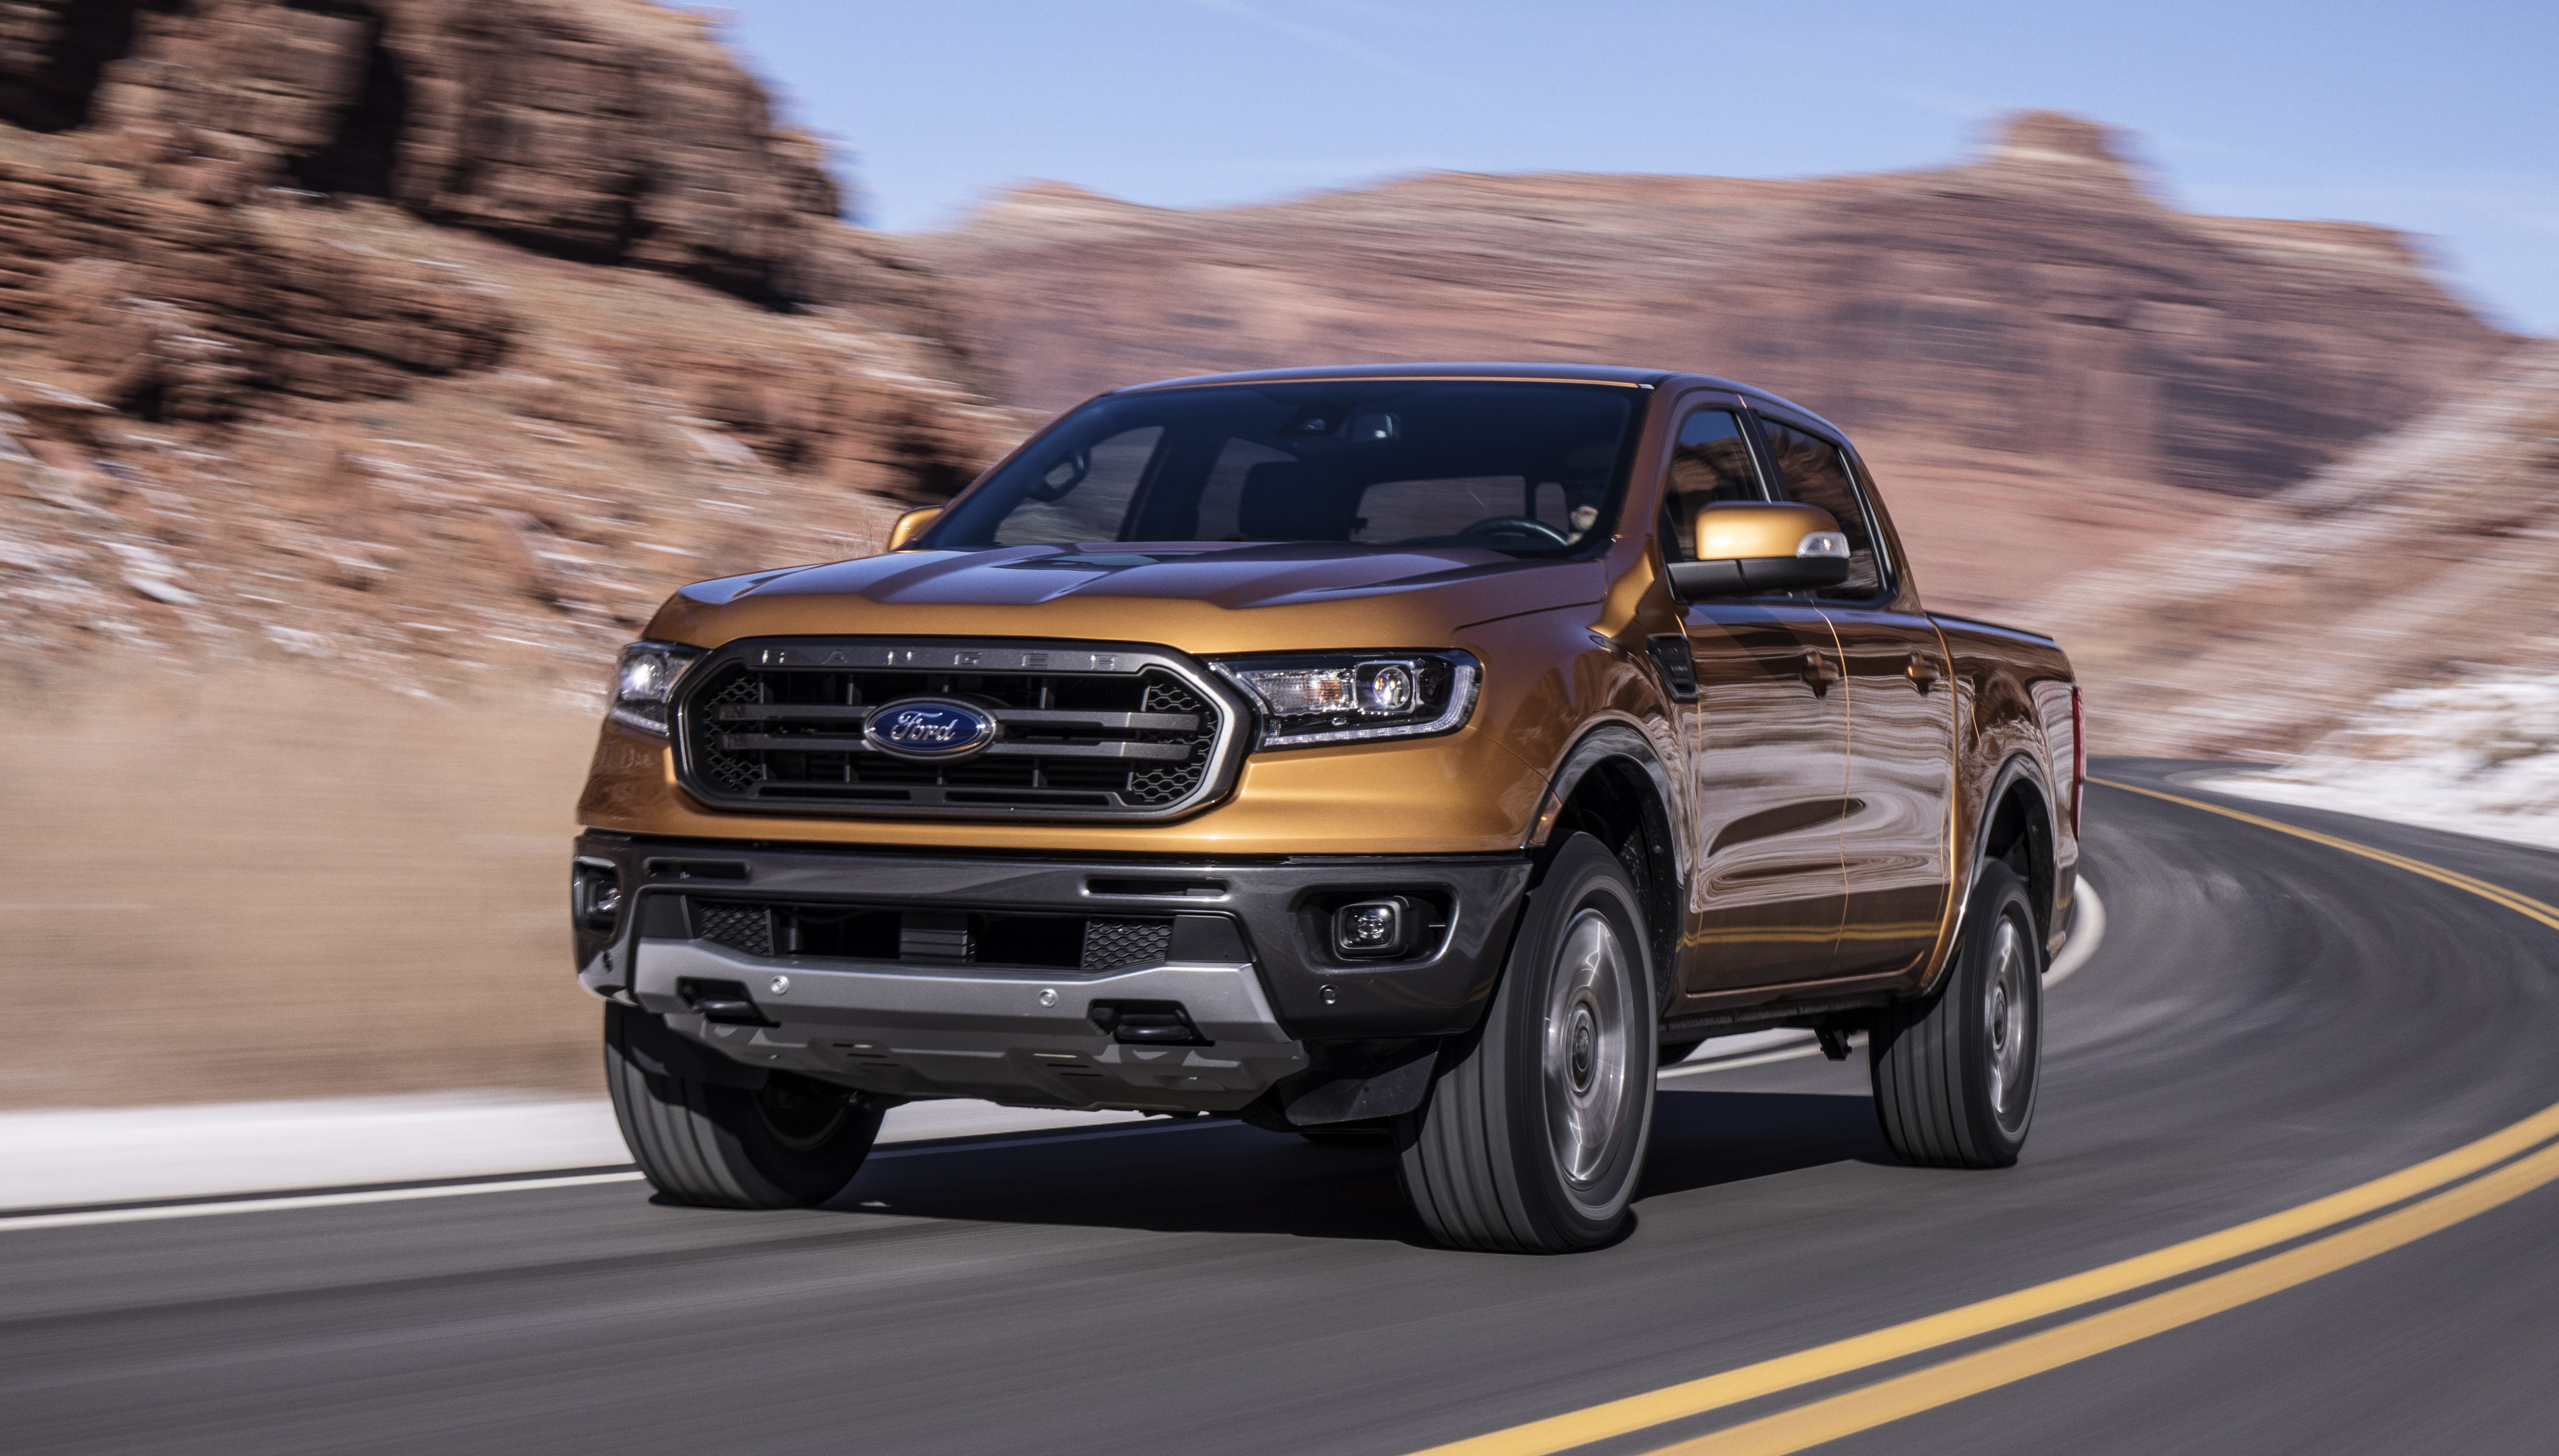 Ford Ranger is Mid-size Truck Economy Champ